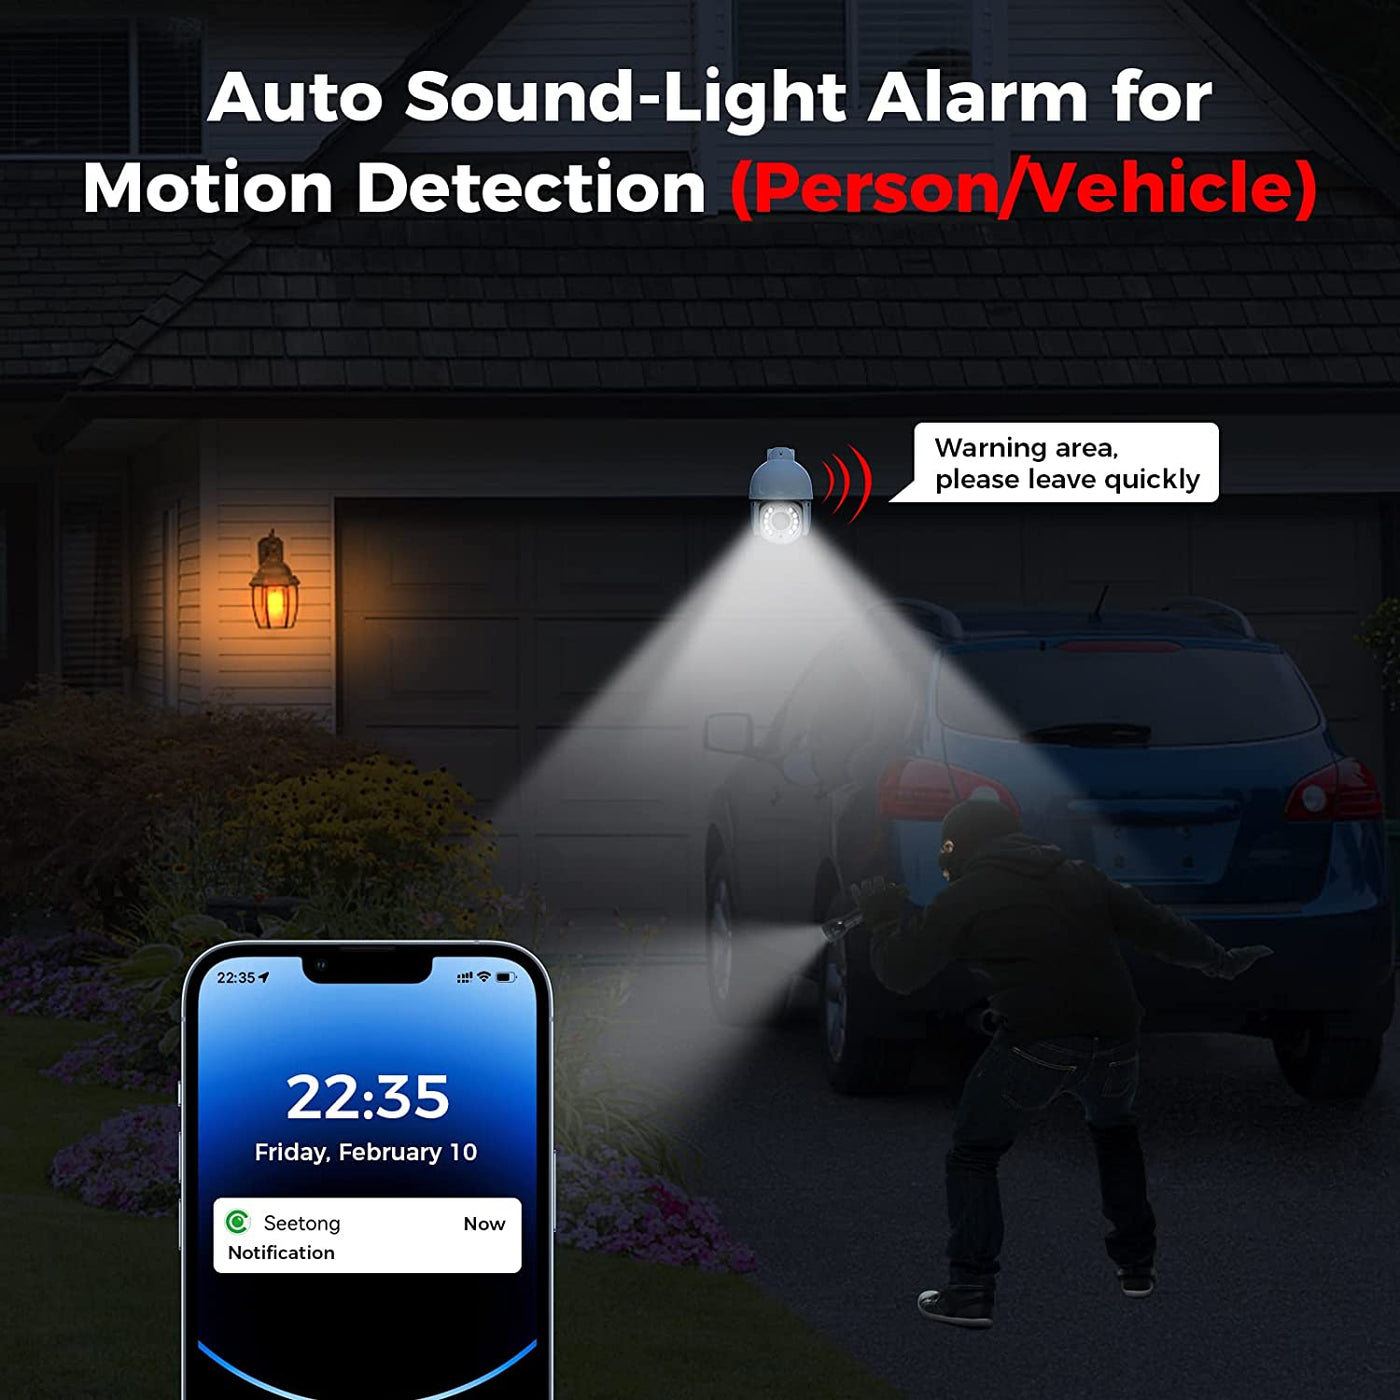 [Human&Vehicle Detect] 5MP PoE PTZ Home Security Cameras, Auto Tracking,10X Optical Zoom, Color Night Vision, 2 Way Audio, 350° View, Spotlight&Sound Alarm for Indoor&Outdoor Home Surveillance